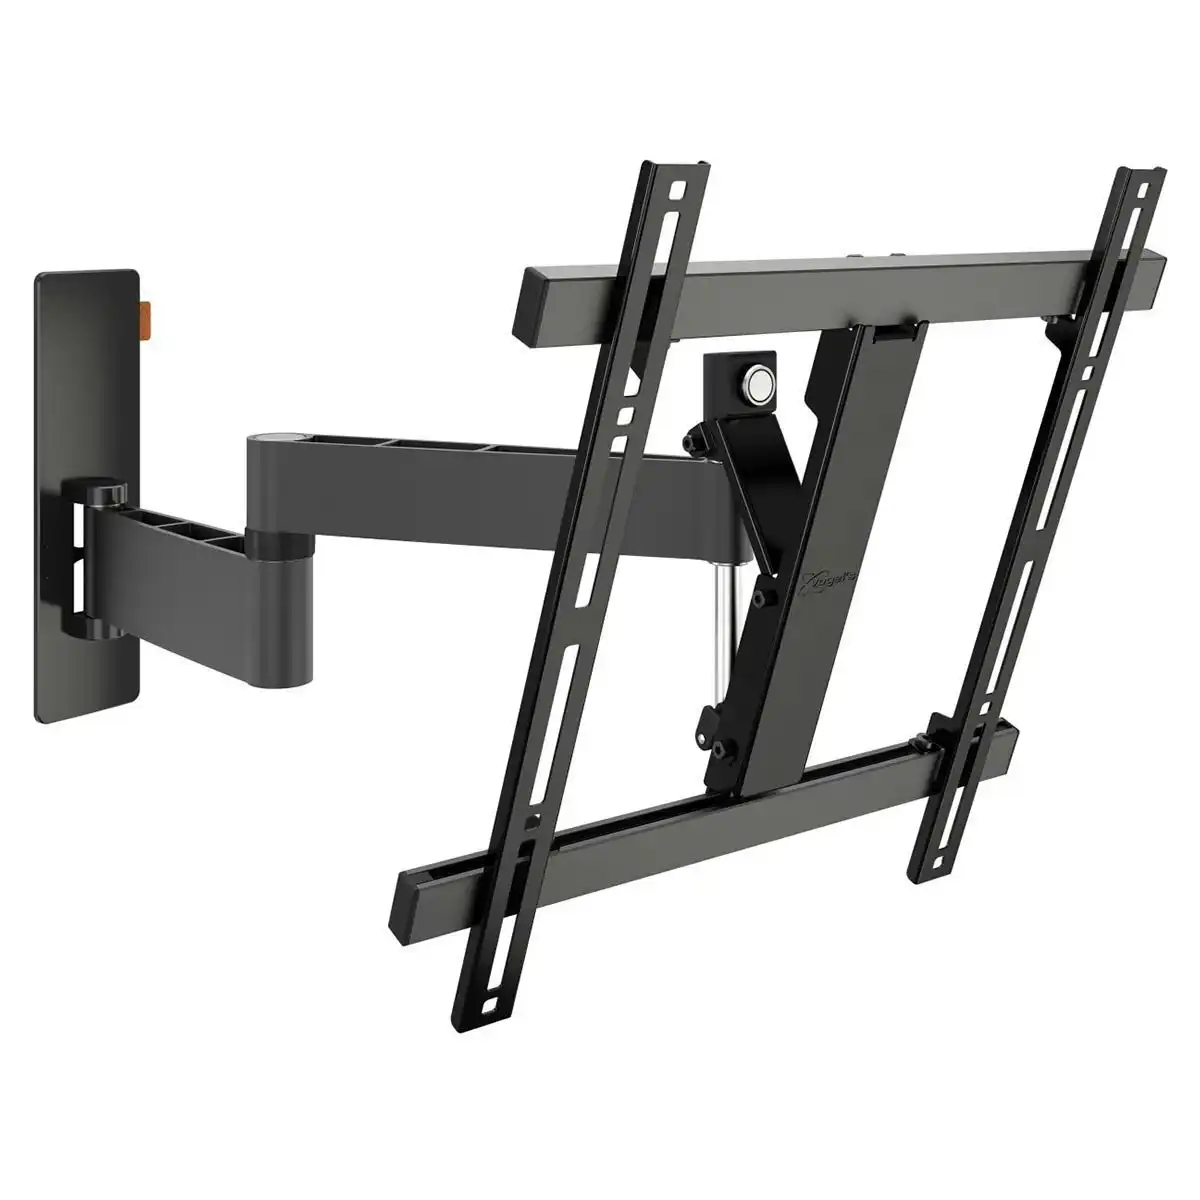 Vogel's Full-Motion TV Wall Mount For 32 To 55 Inch TVs